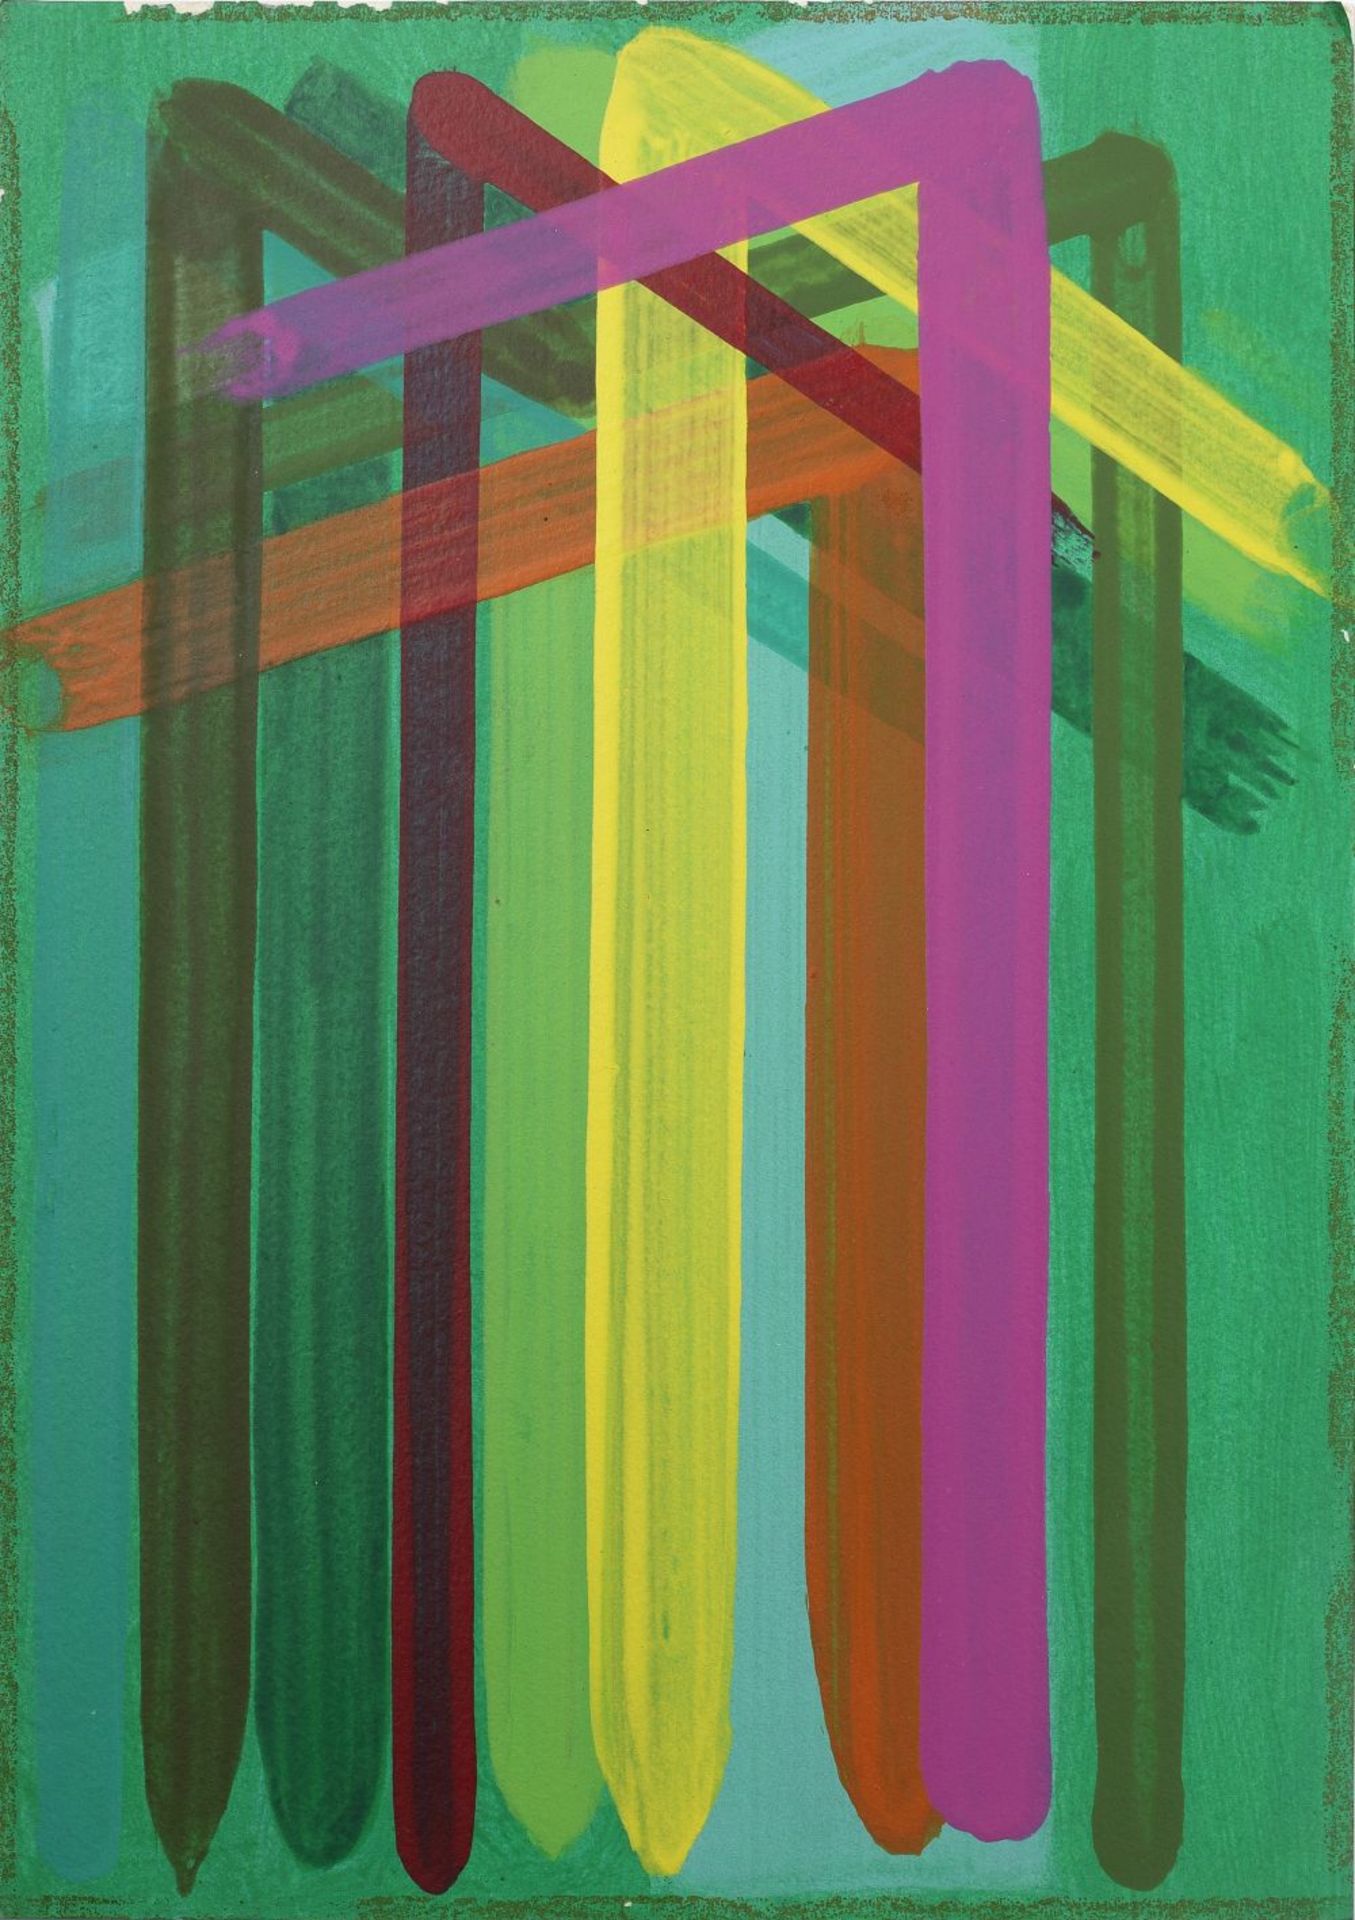 John Copnall (British, 1928-2007) Untitled (Striped Abstracts) the largest 34.5 x 27.5cm (13 9/16...